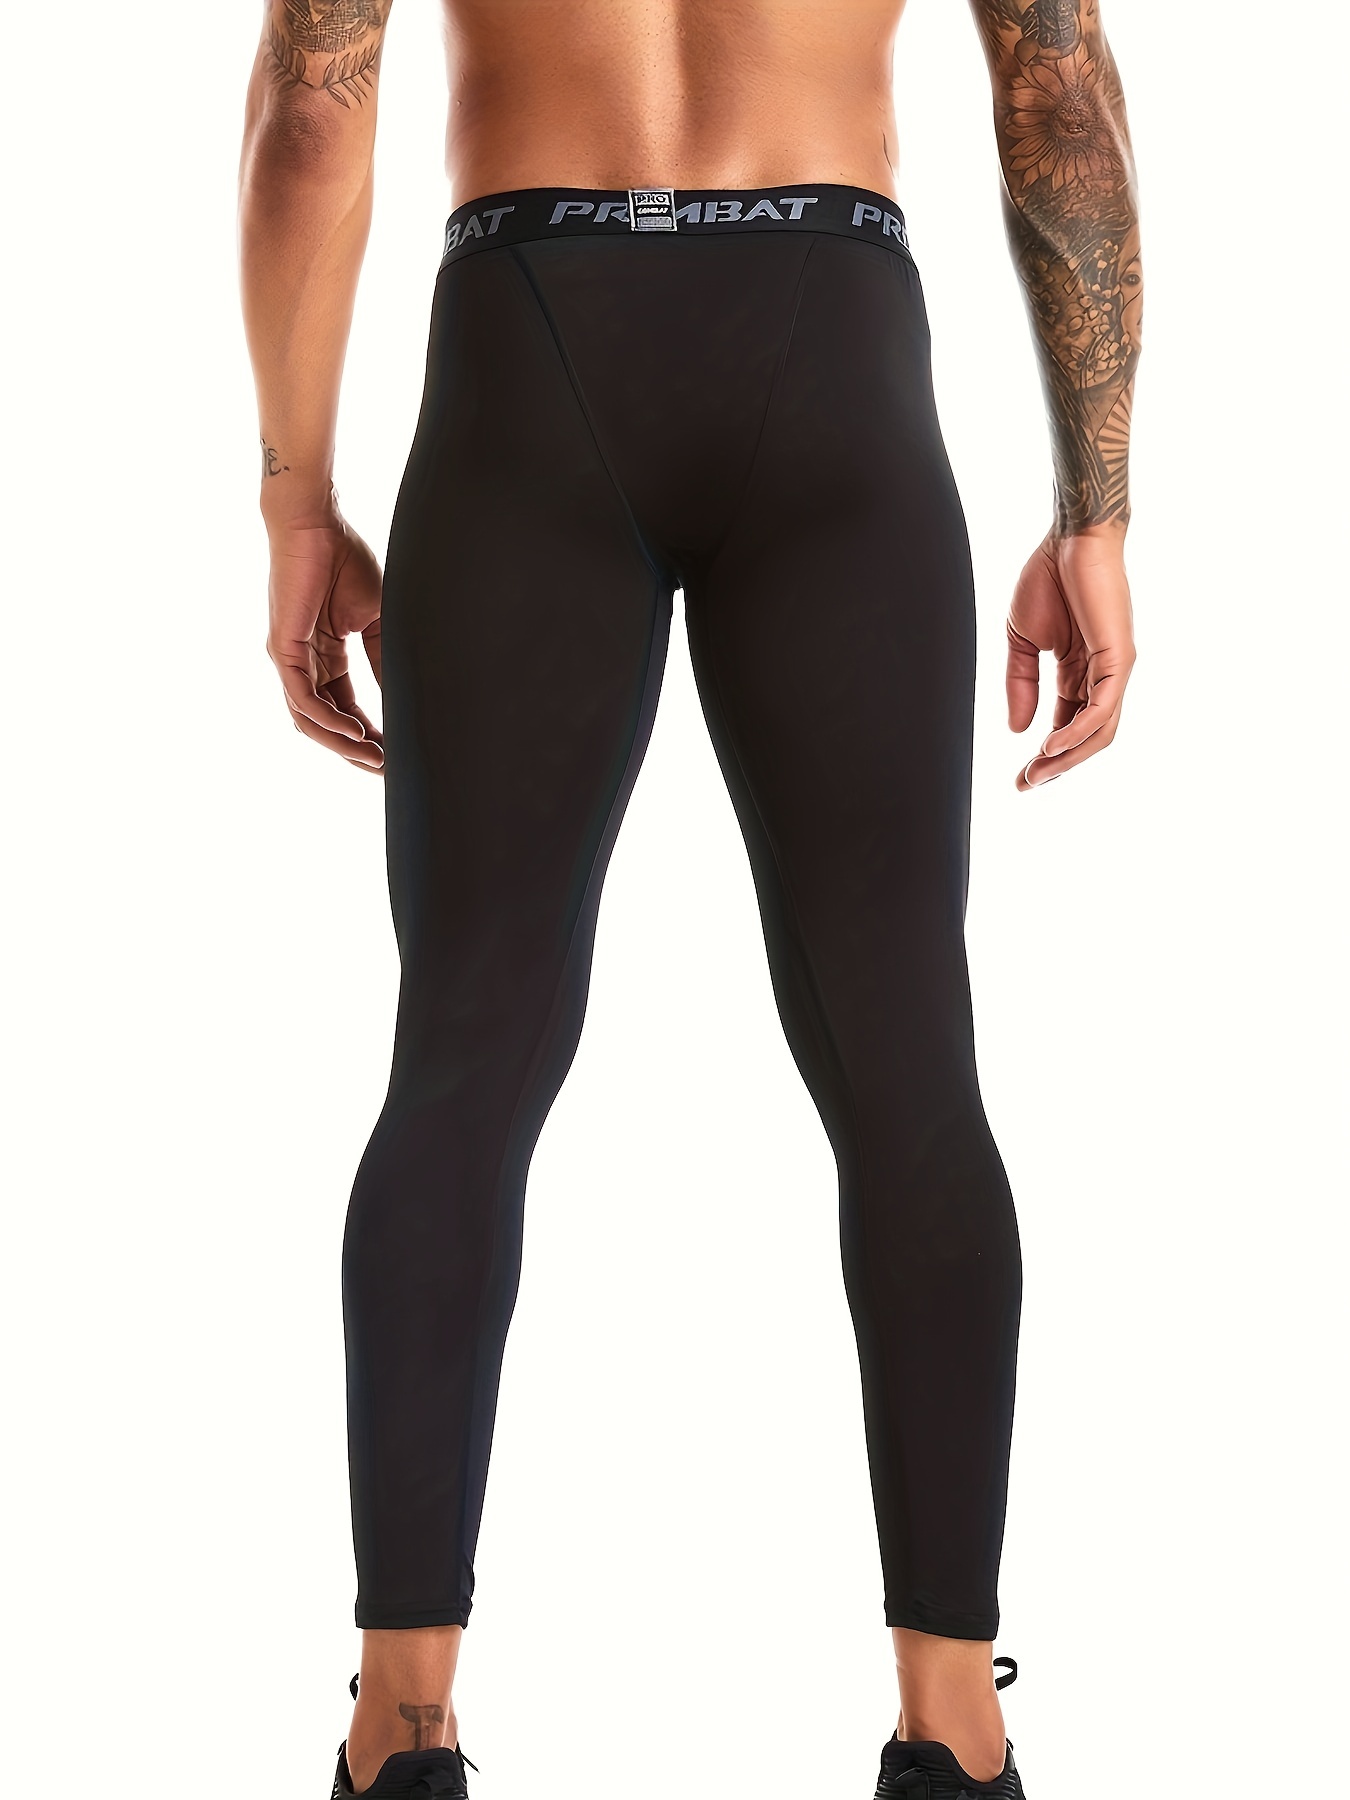 Compression Pants Men Sports Gym Fitness Tights Athletic Training Trousers